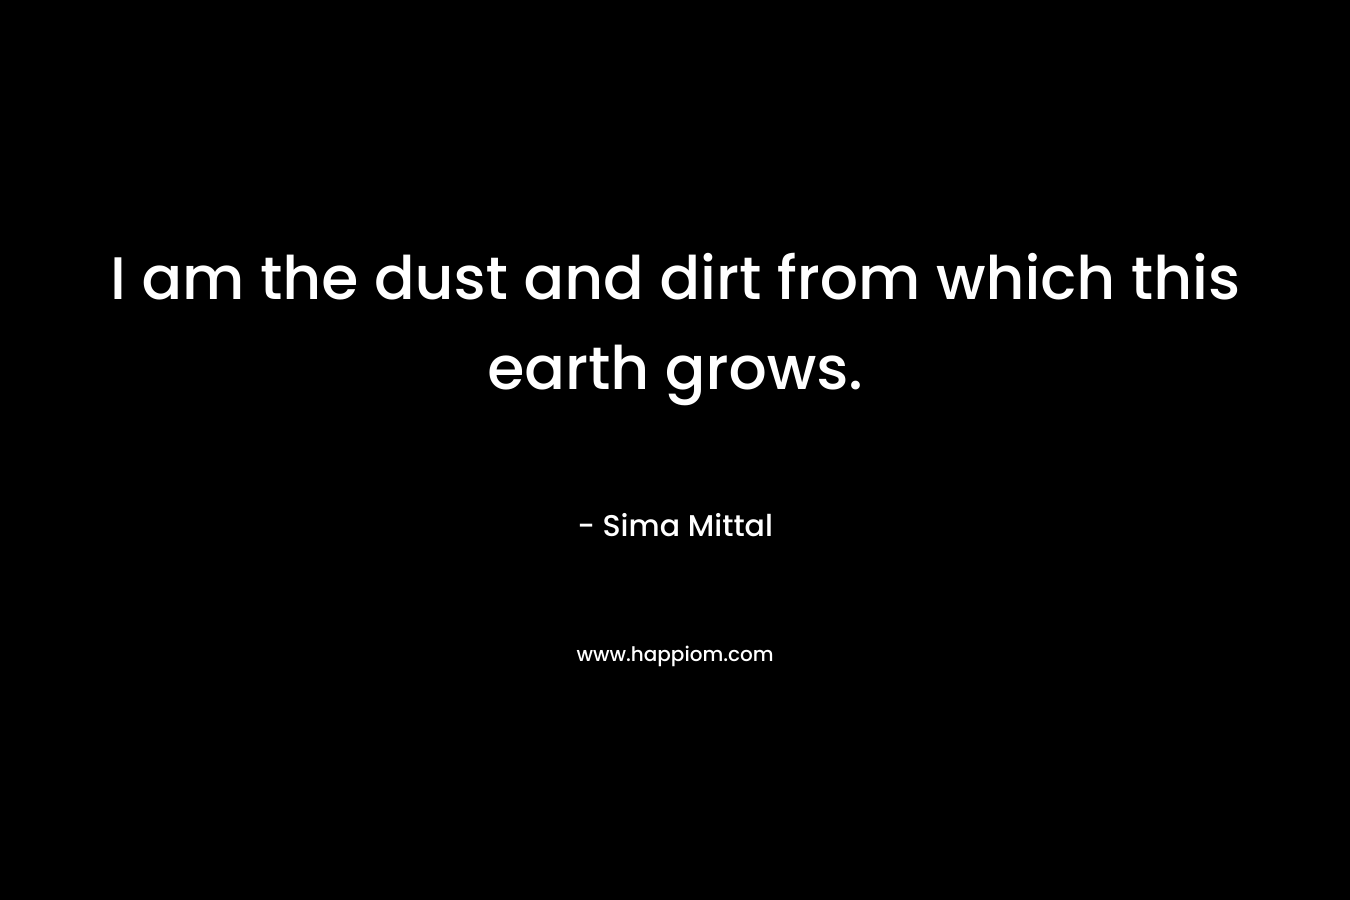 I am the dust and dirt from which this earth grows.